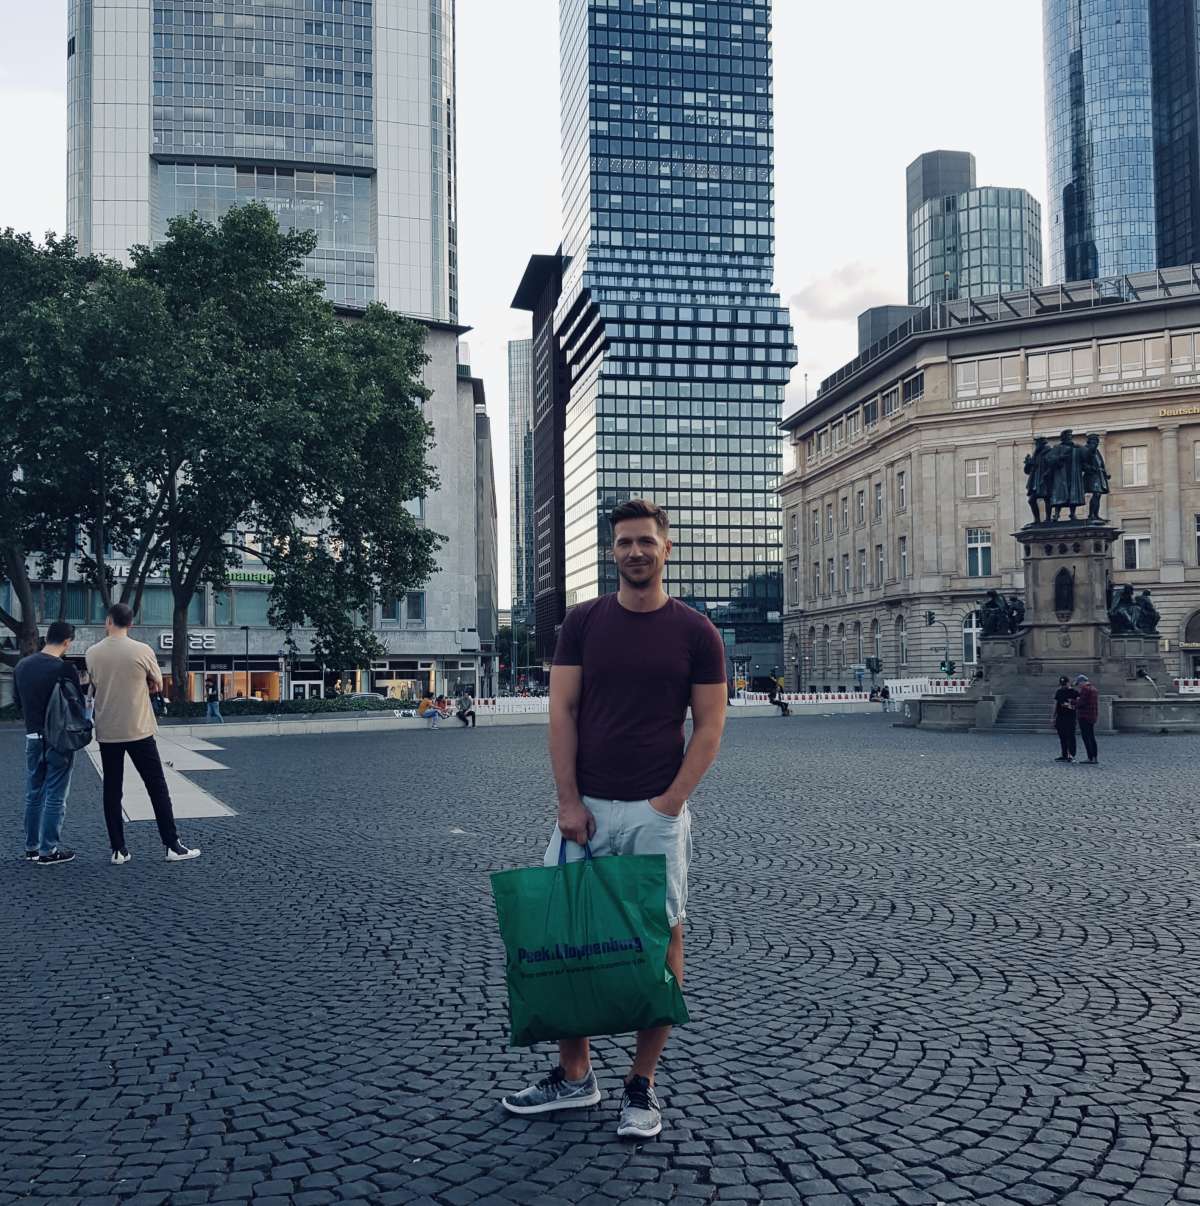 Smiling man holding a shopping bag stands in gay Frankfurt's central square, with the iconic Deutsche Bank towers in the background.